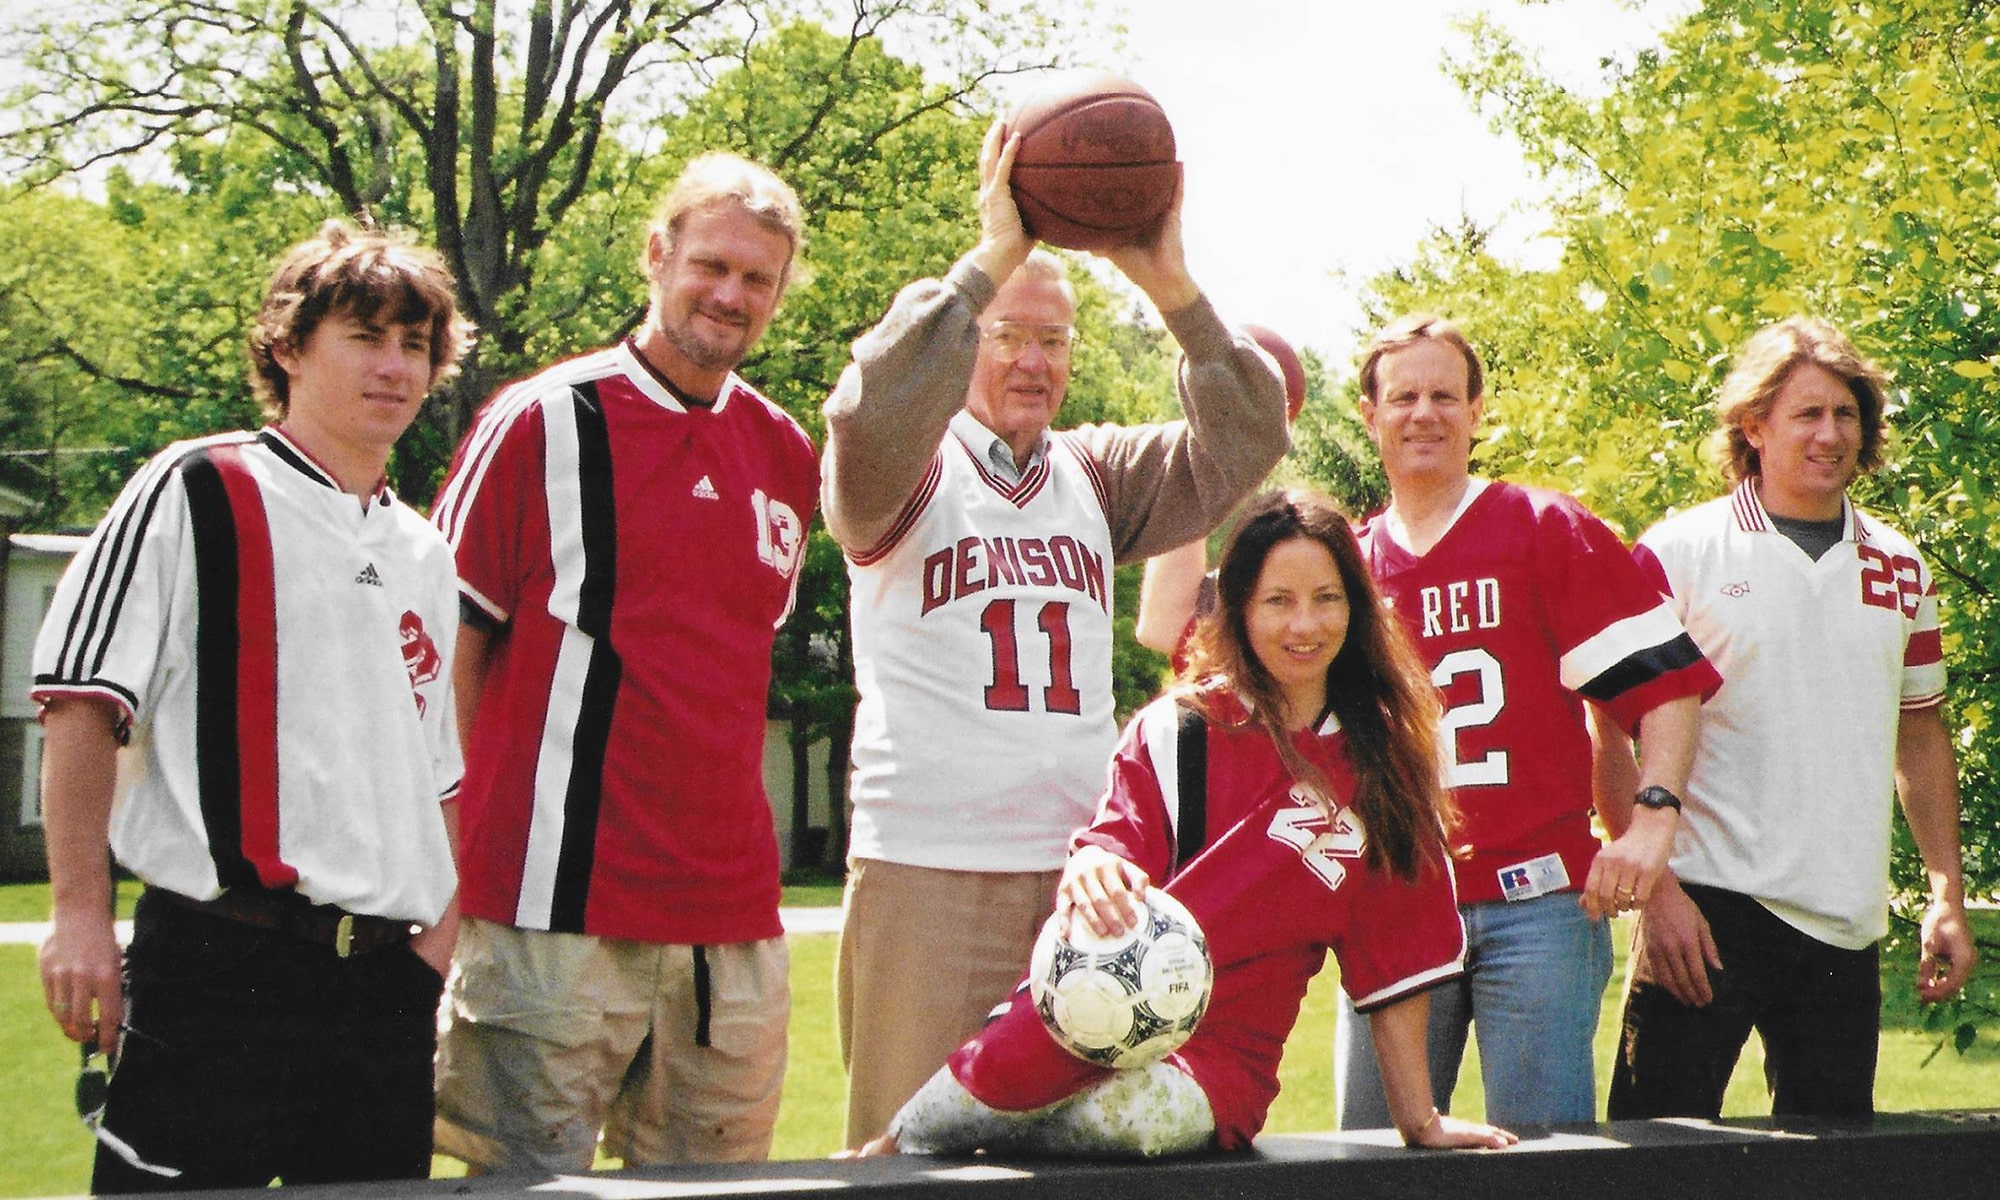 Hylbert family members pictured on the Denison campus in 2001, from left: Brian ’01, Tony ’72, Paul Sr. ’43, Jennifer ’88, Paul Jr. ’66, and Scott ’91.